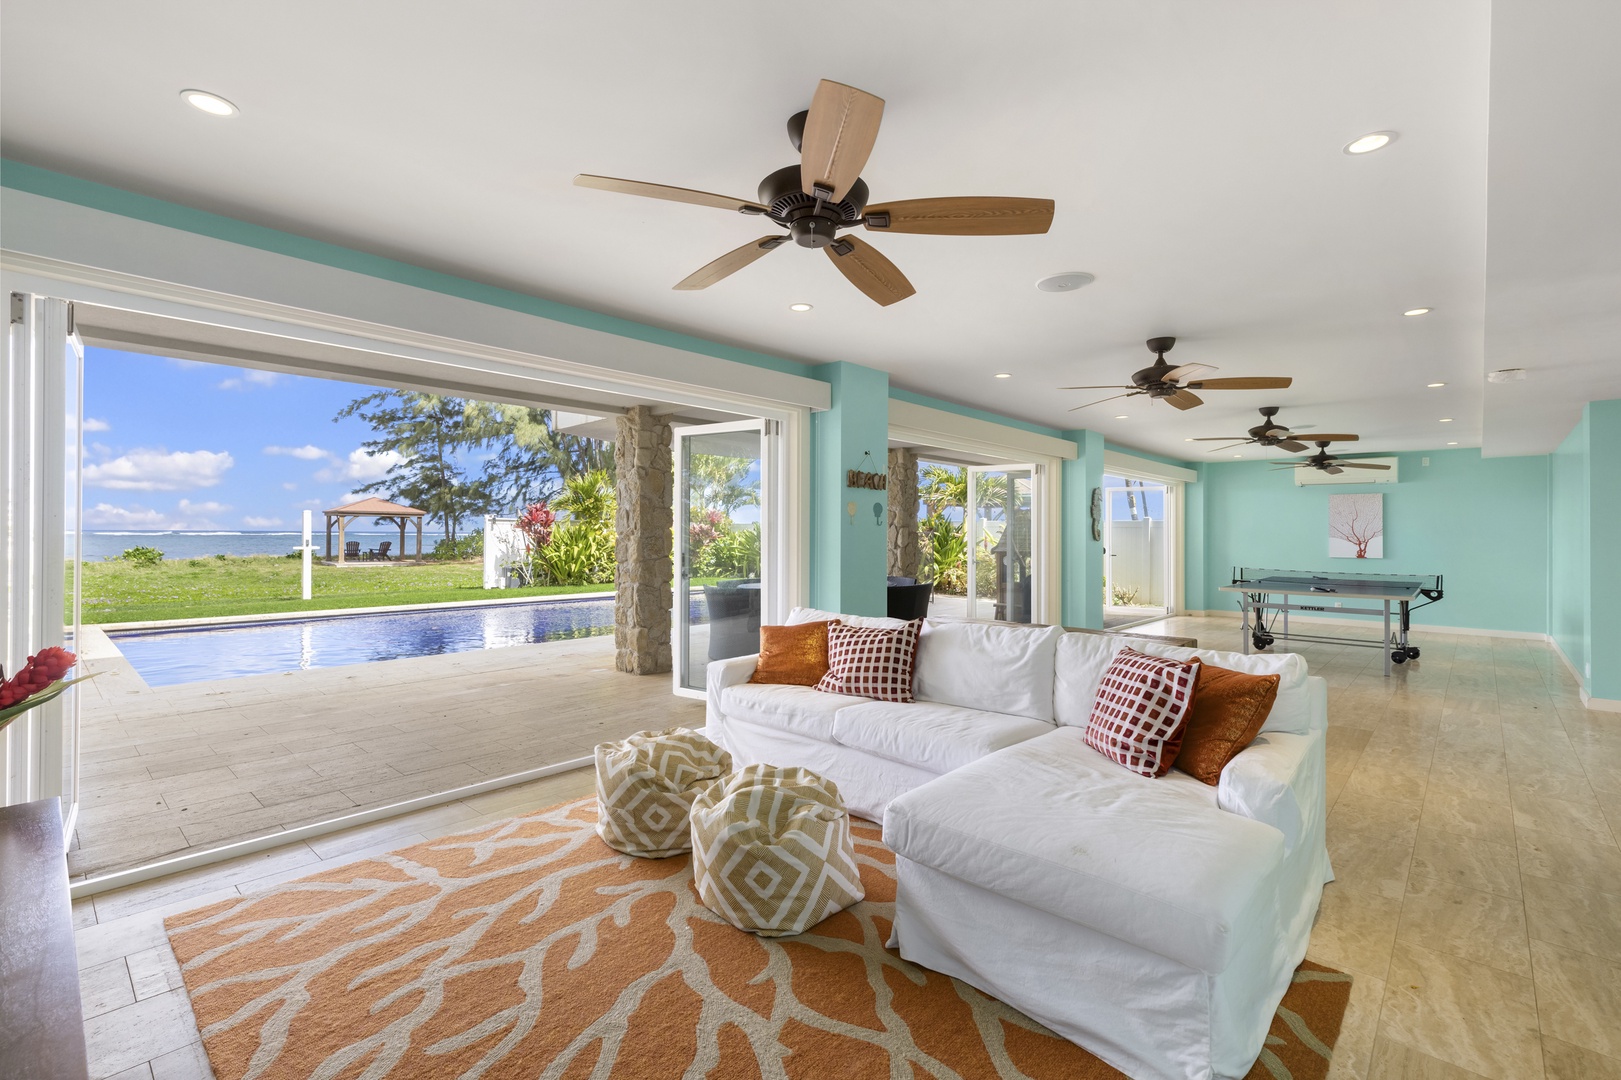 Waialua Vacation Rentals, Kala'iku* - First-floor media area, which opens to the pool.